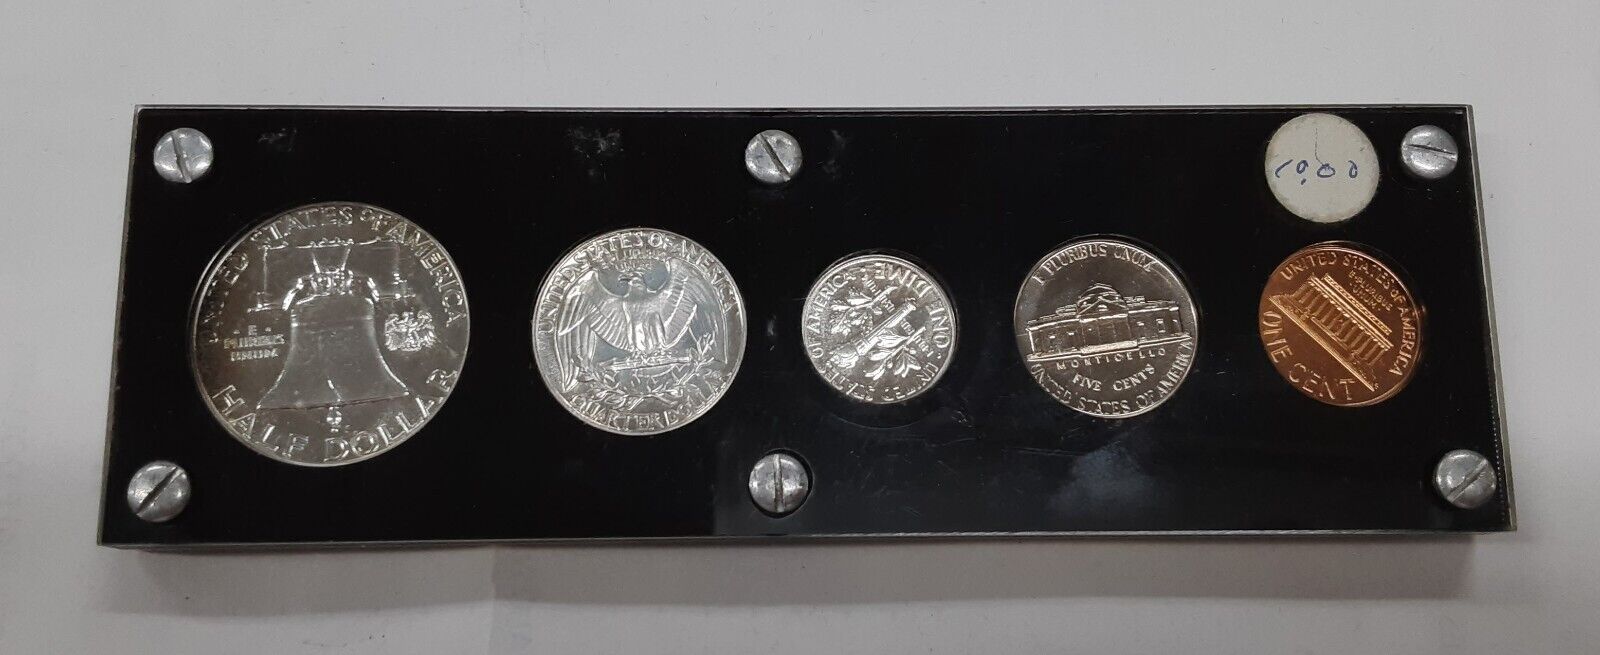 1962 US Mint Silver Proof Set 5 Gem Coins in Black Acrylic Holder (B)